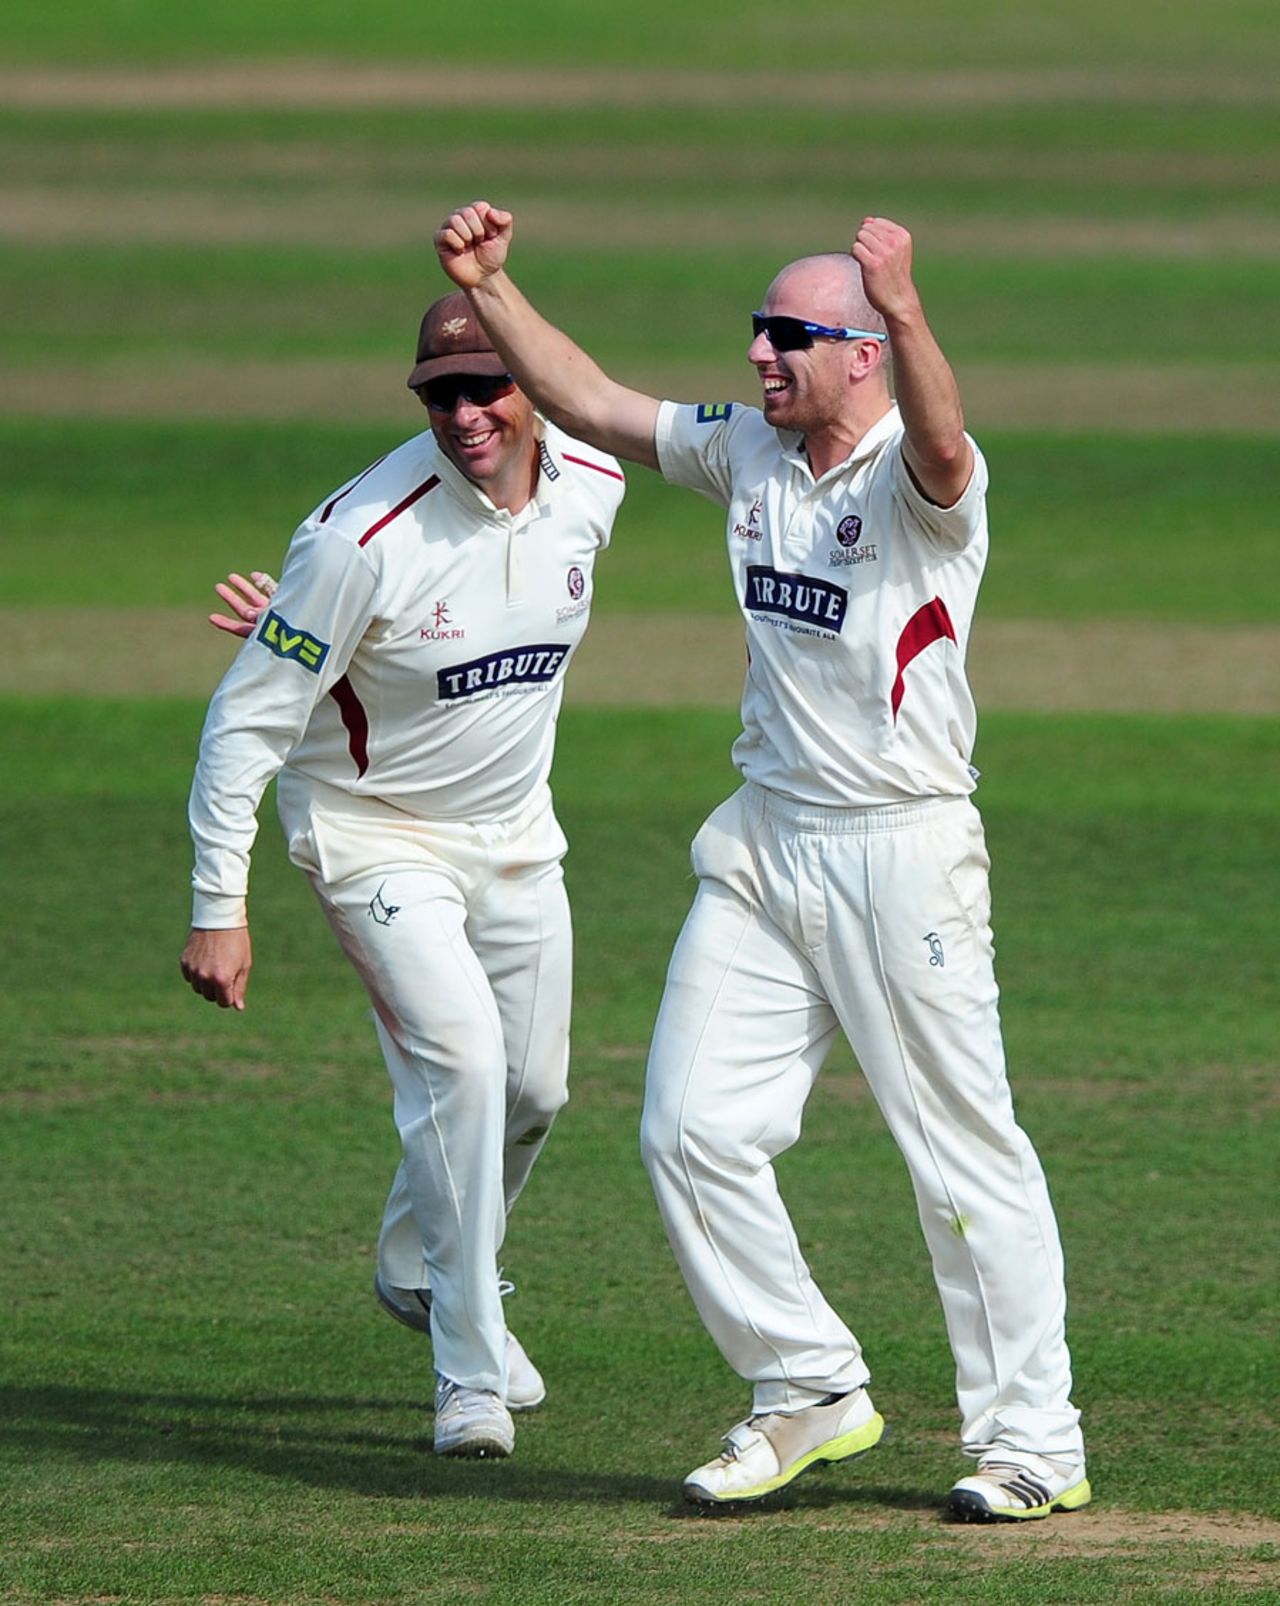 Jack Leach picked up the vital wicket of Eoin Morgan, Somerset v Middlesex, County Championship, Division One, Taunton, 3rd day, September 17, 2014